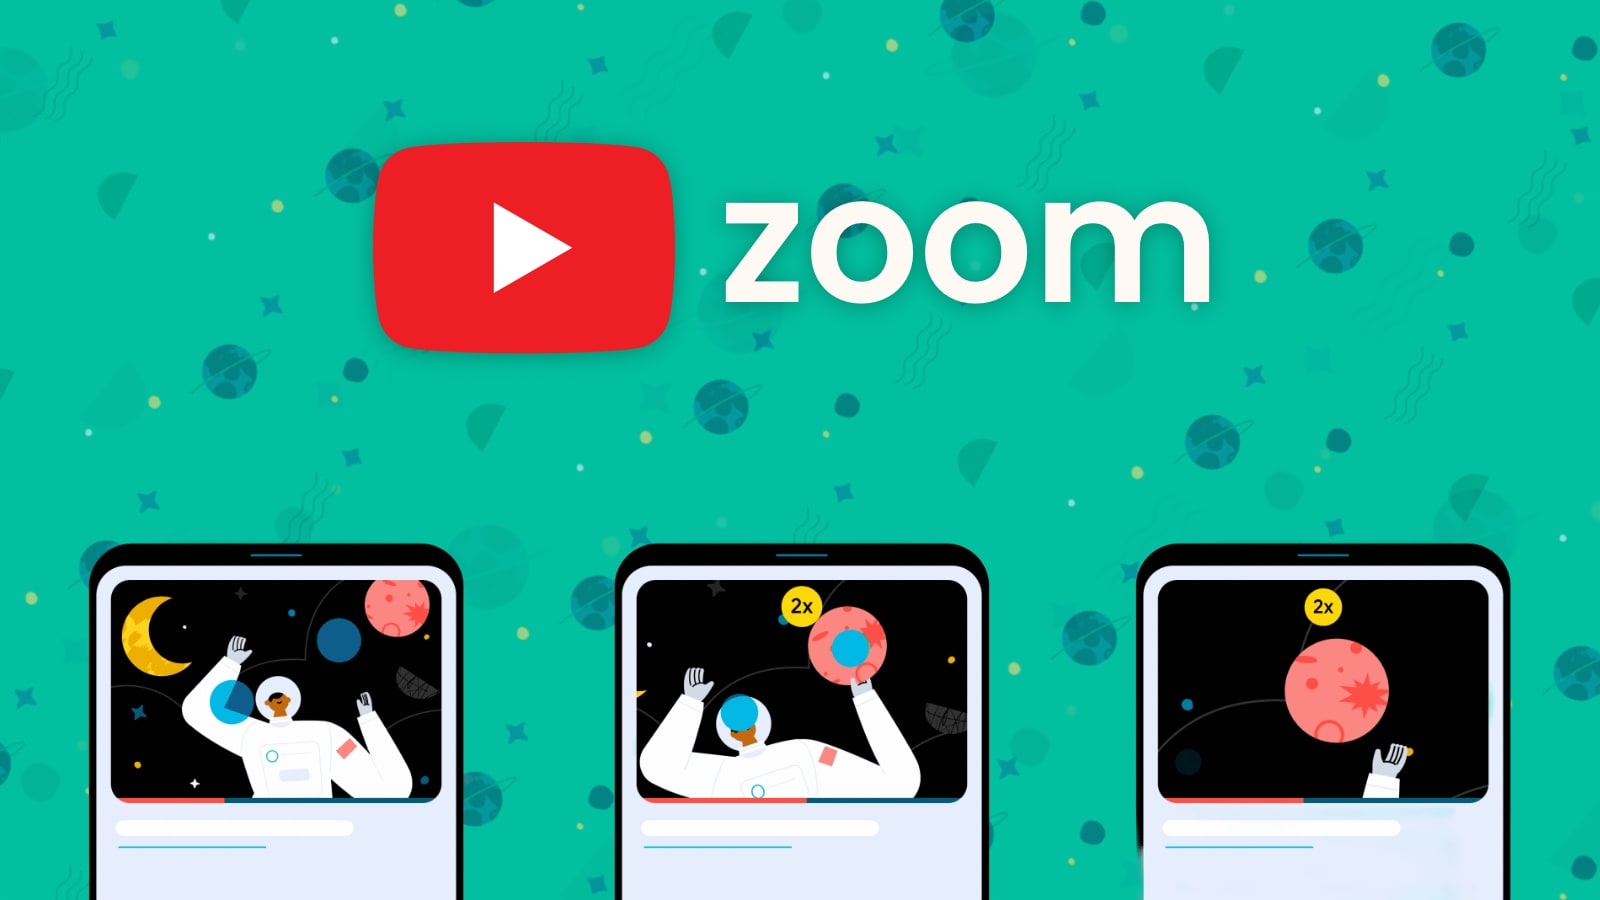 Pinch to Zoom